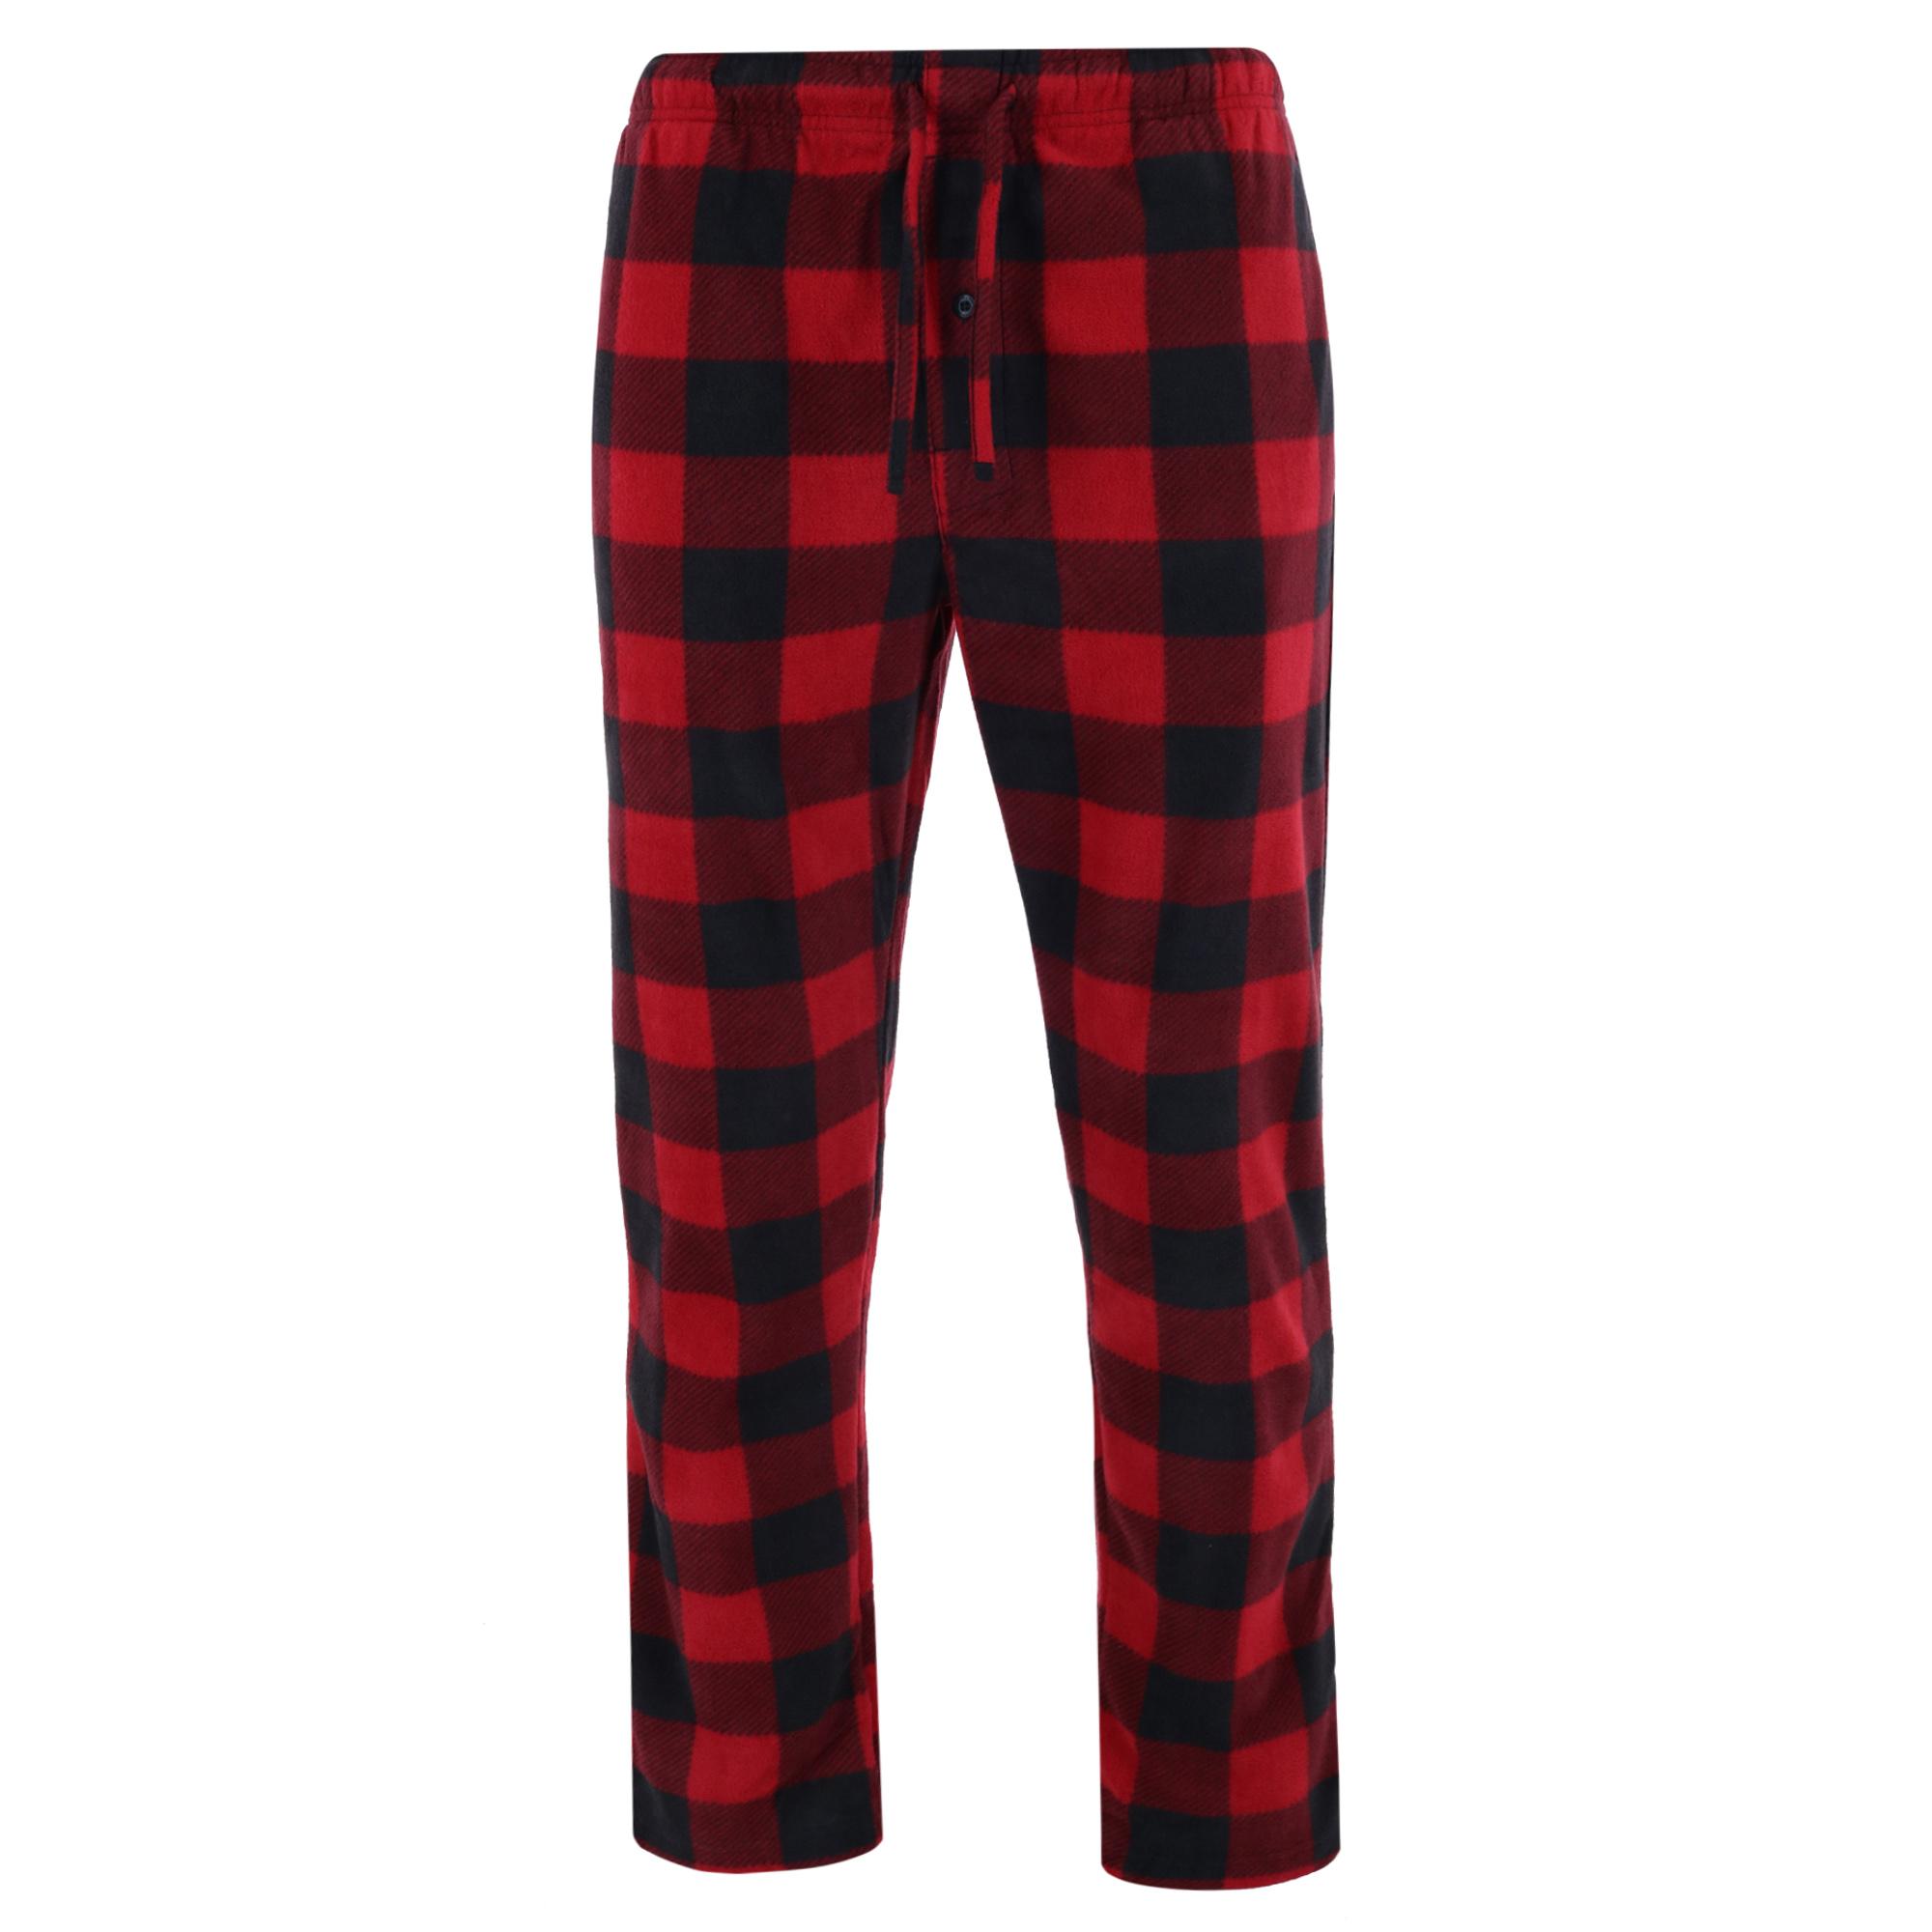 Selected Color is Red Buffalo Plaid